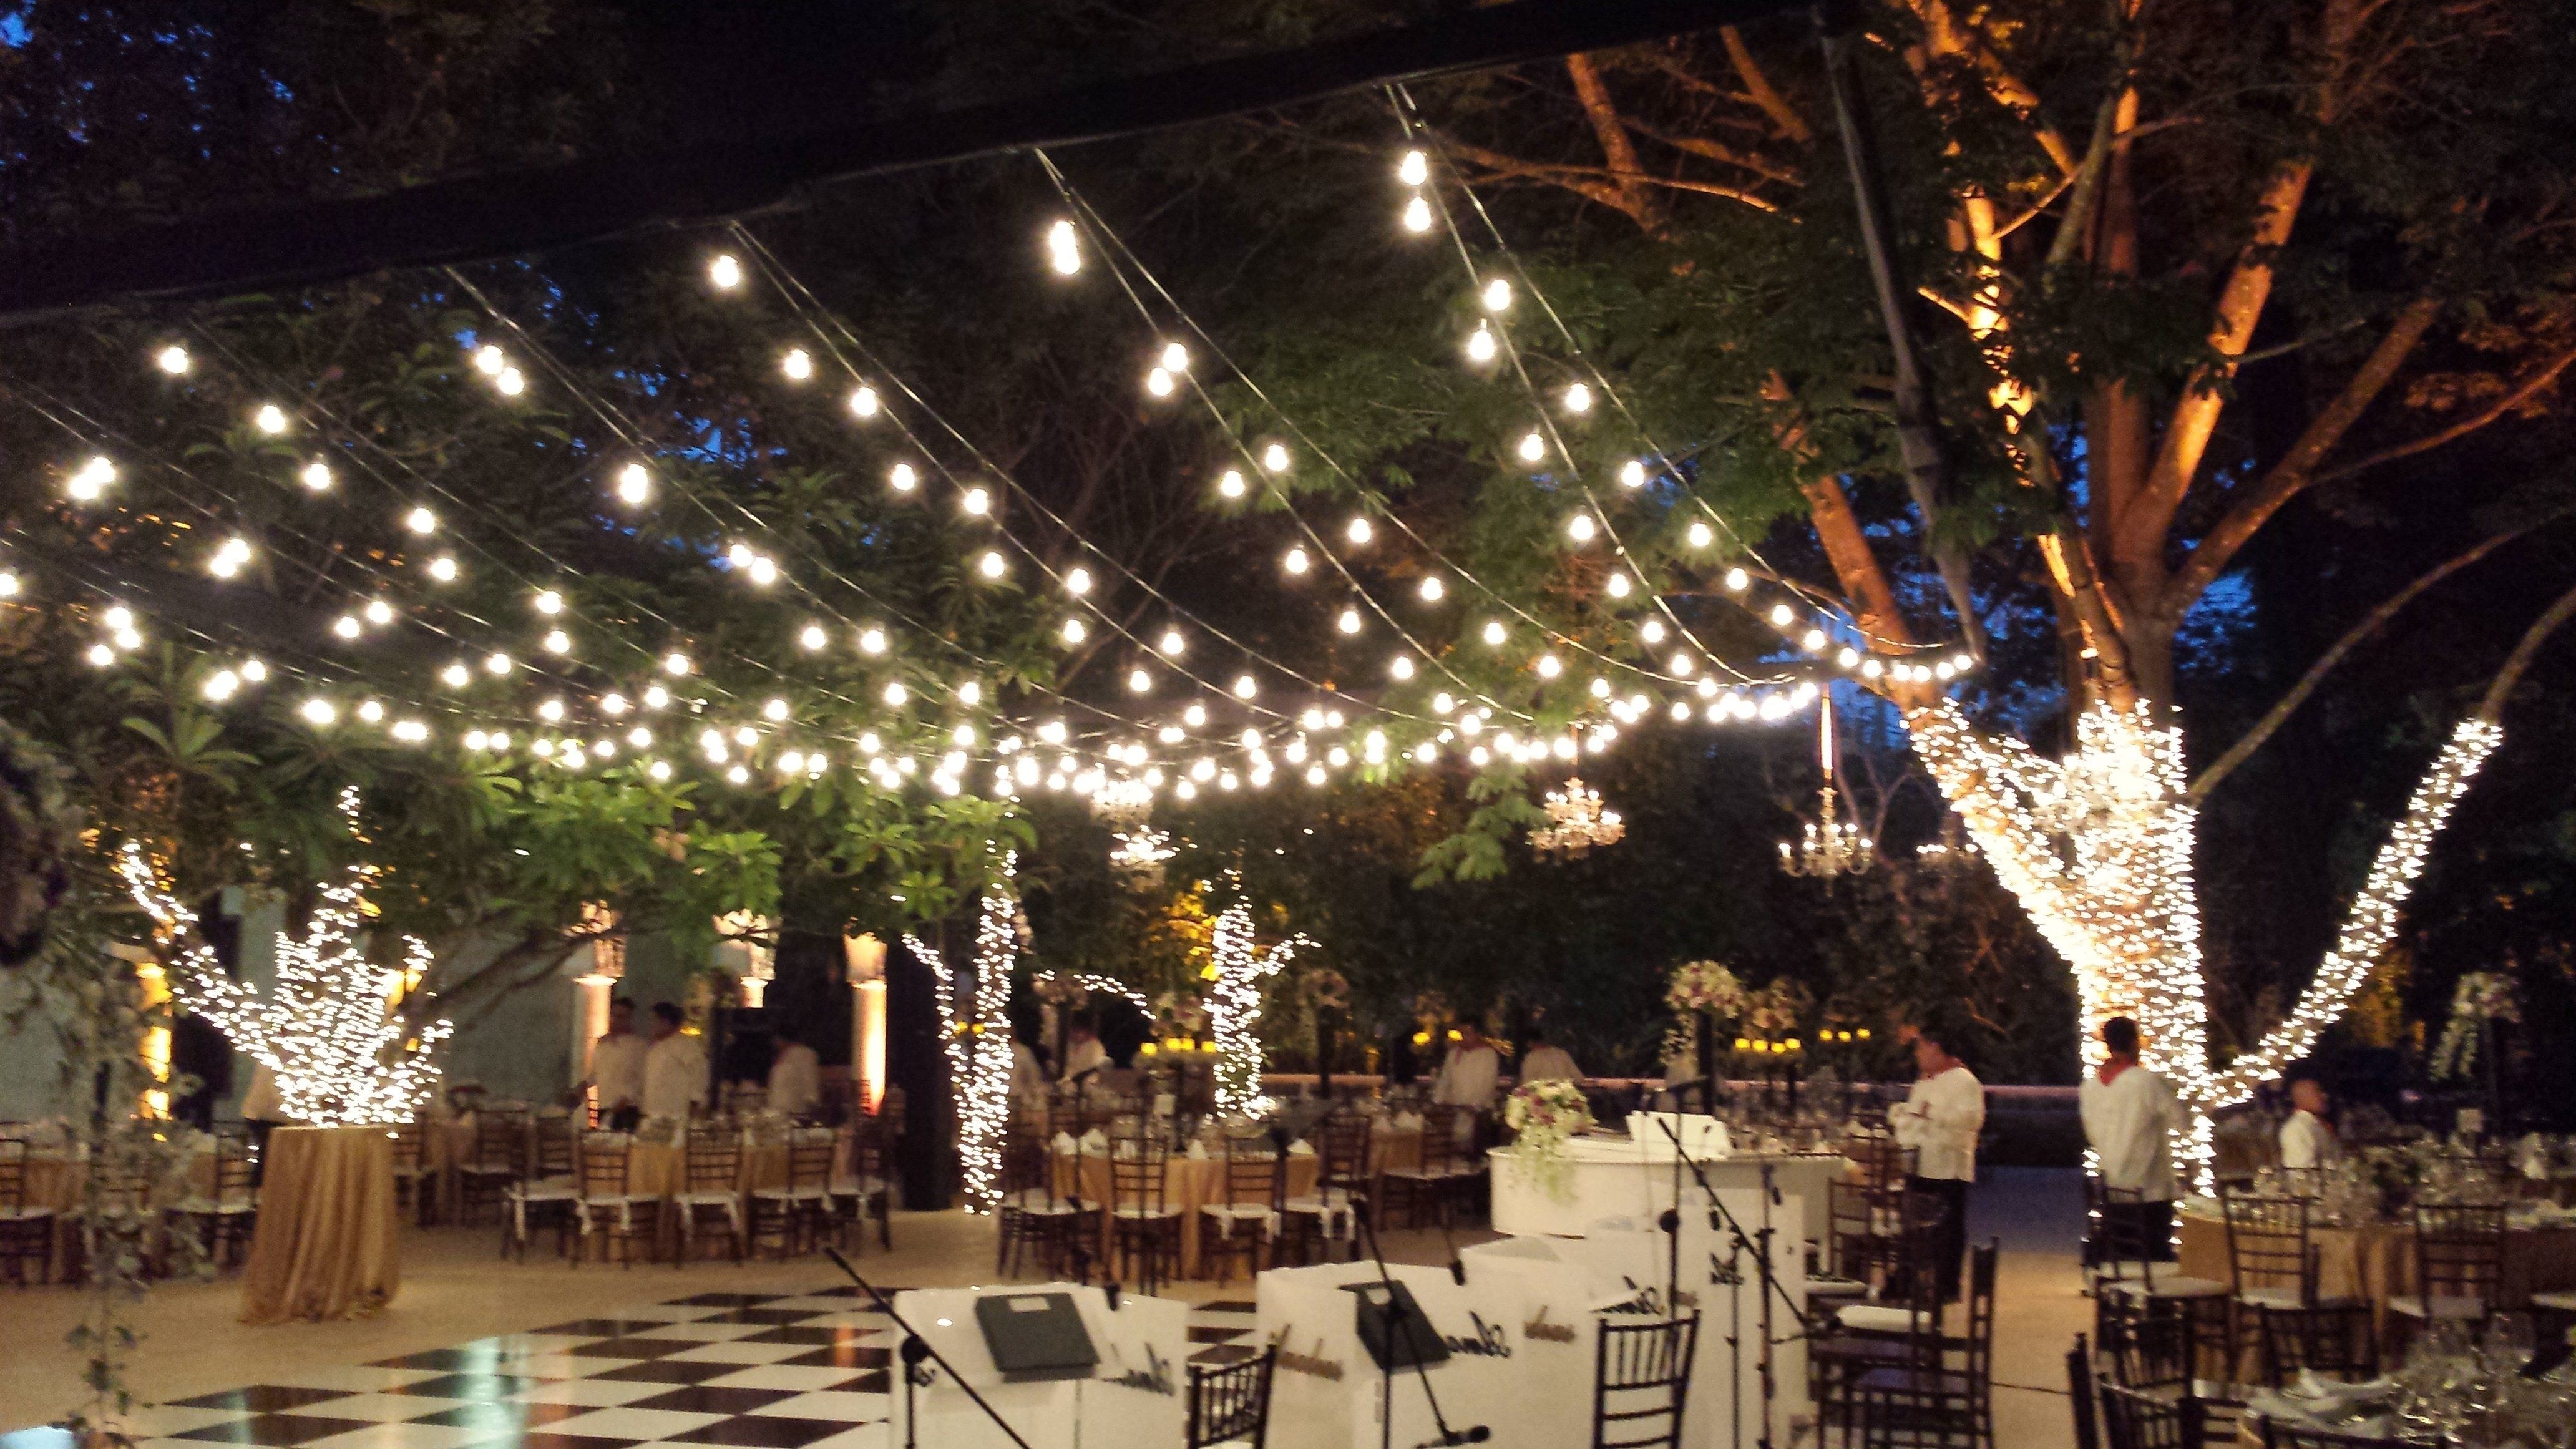 Fascinating Hanging String Lights Outdoors Ideas On Patio Icam Throughout Outdoor Hanging Fairy Lights (View 7 of 15)